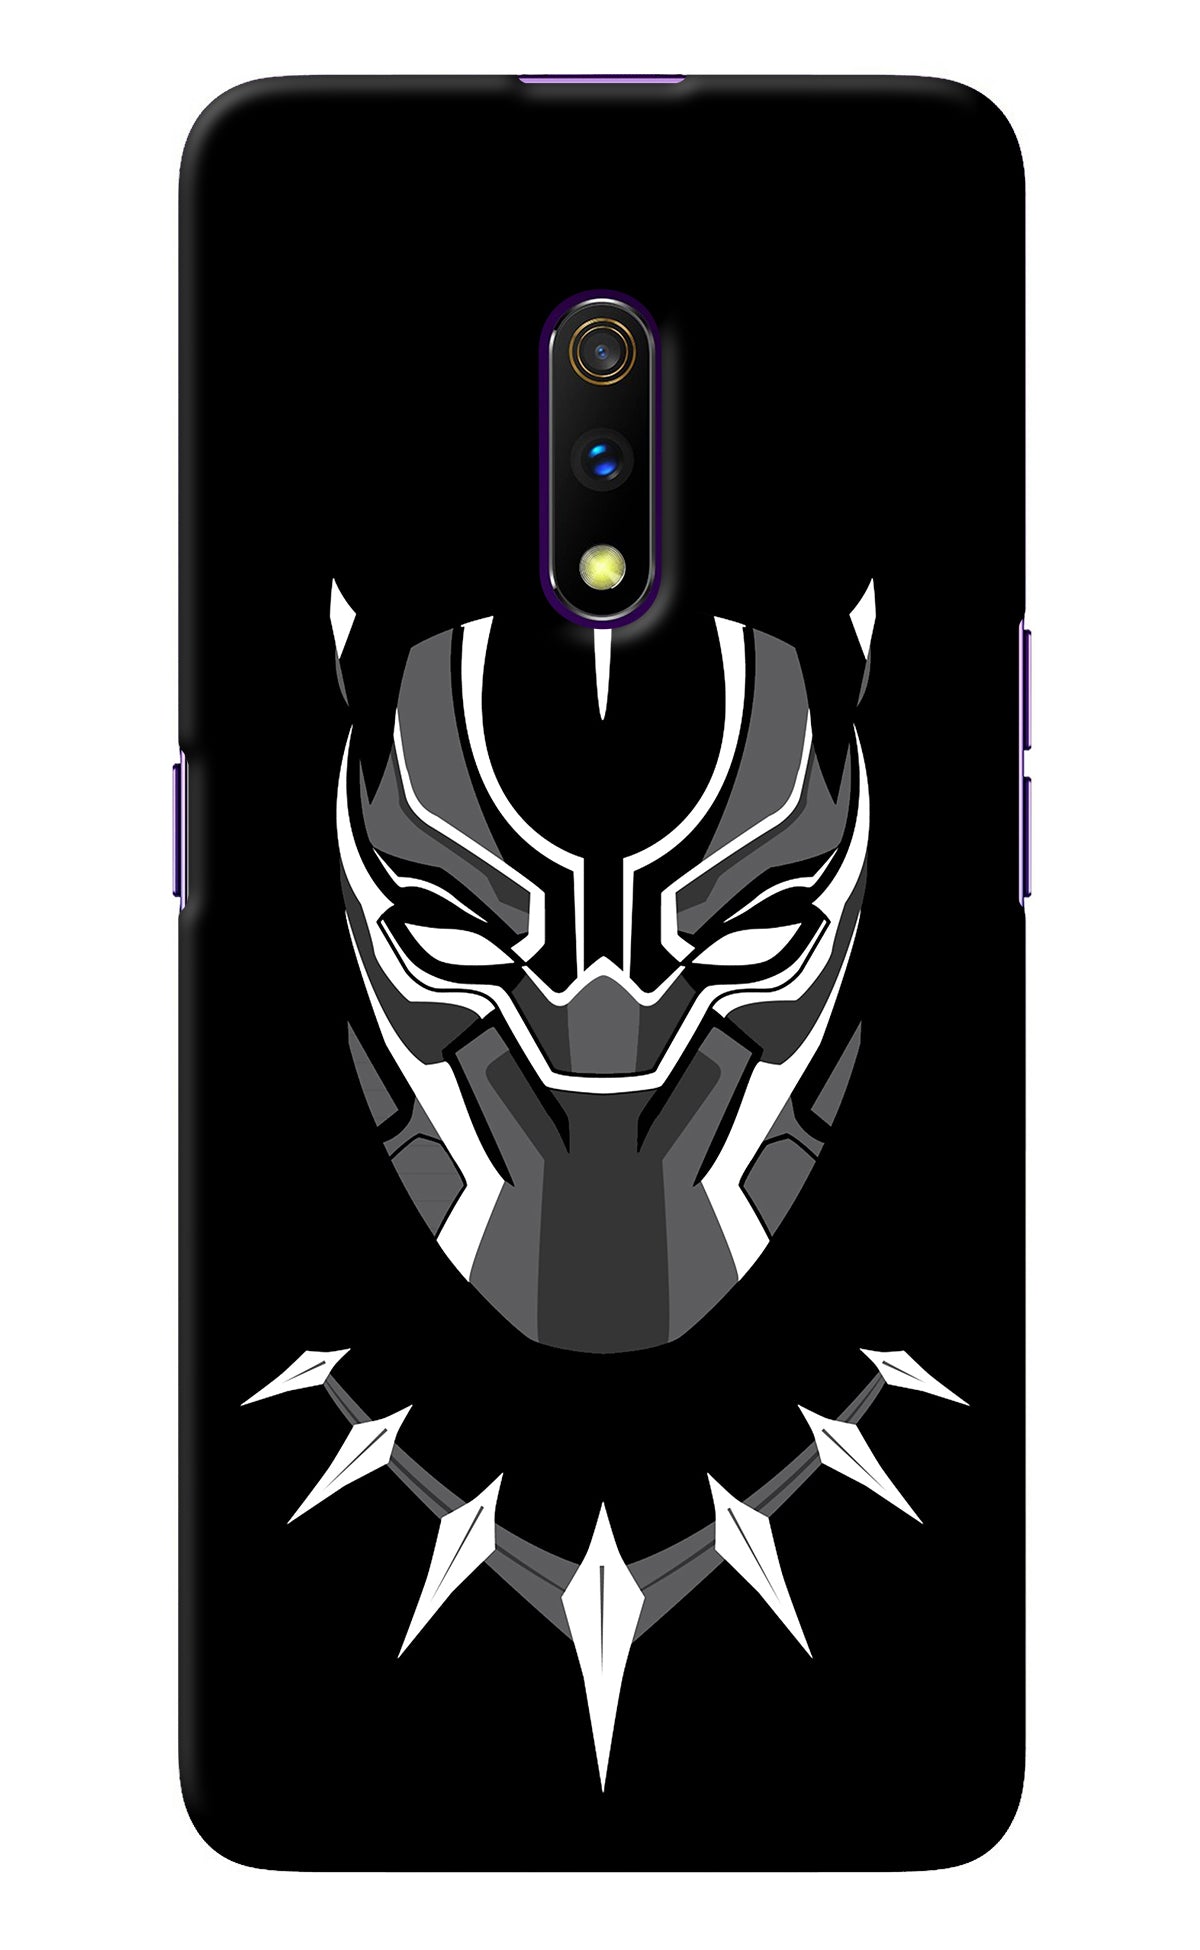 Black Panther Realme X Back Cover